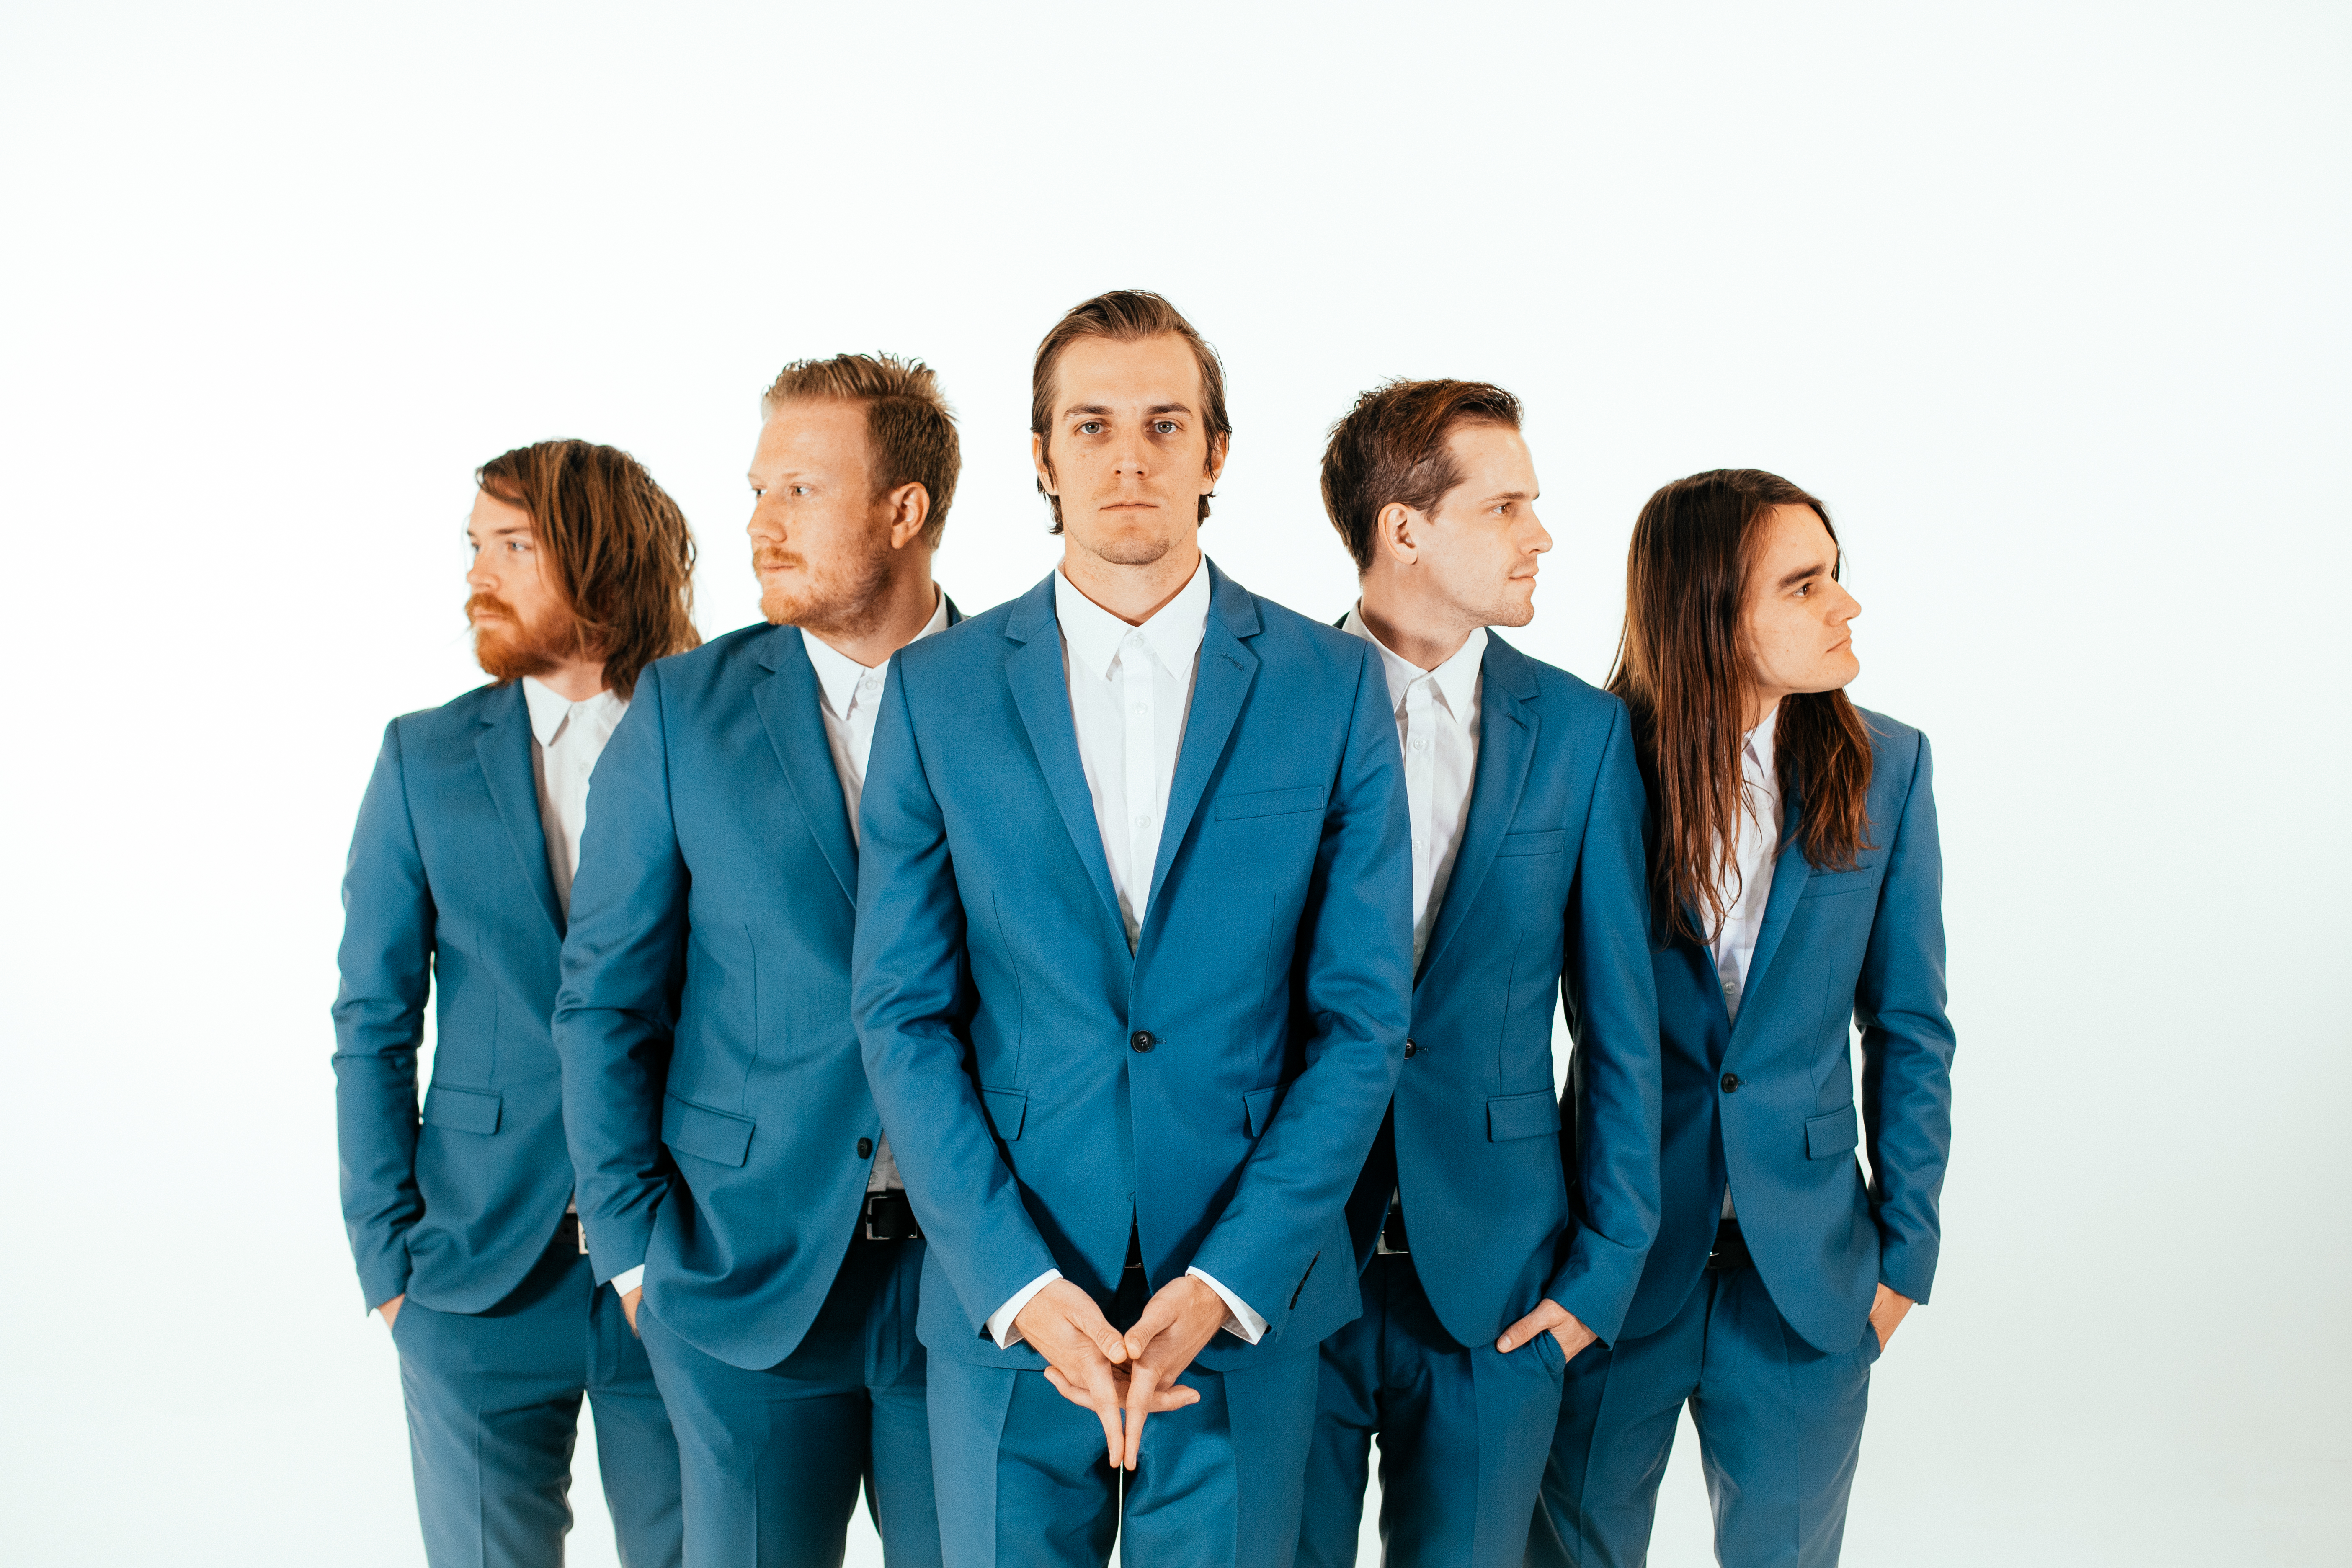 The Maine Releases New Music Video for ‘Am I Pretty’: Watch